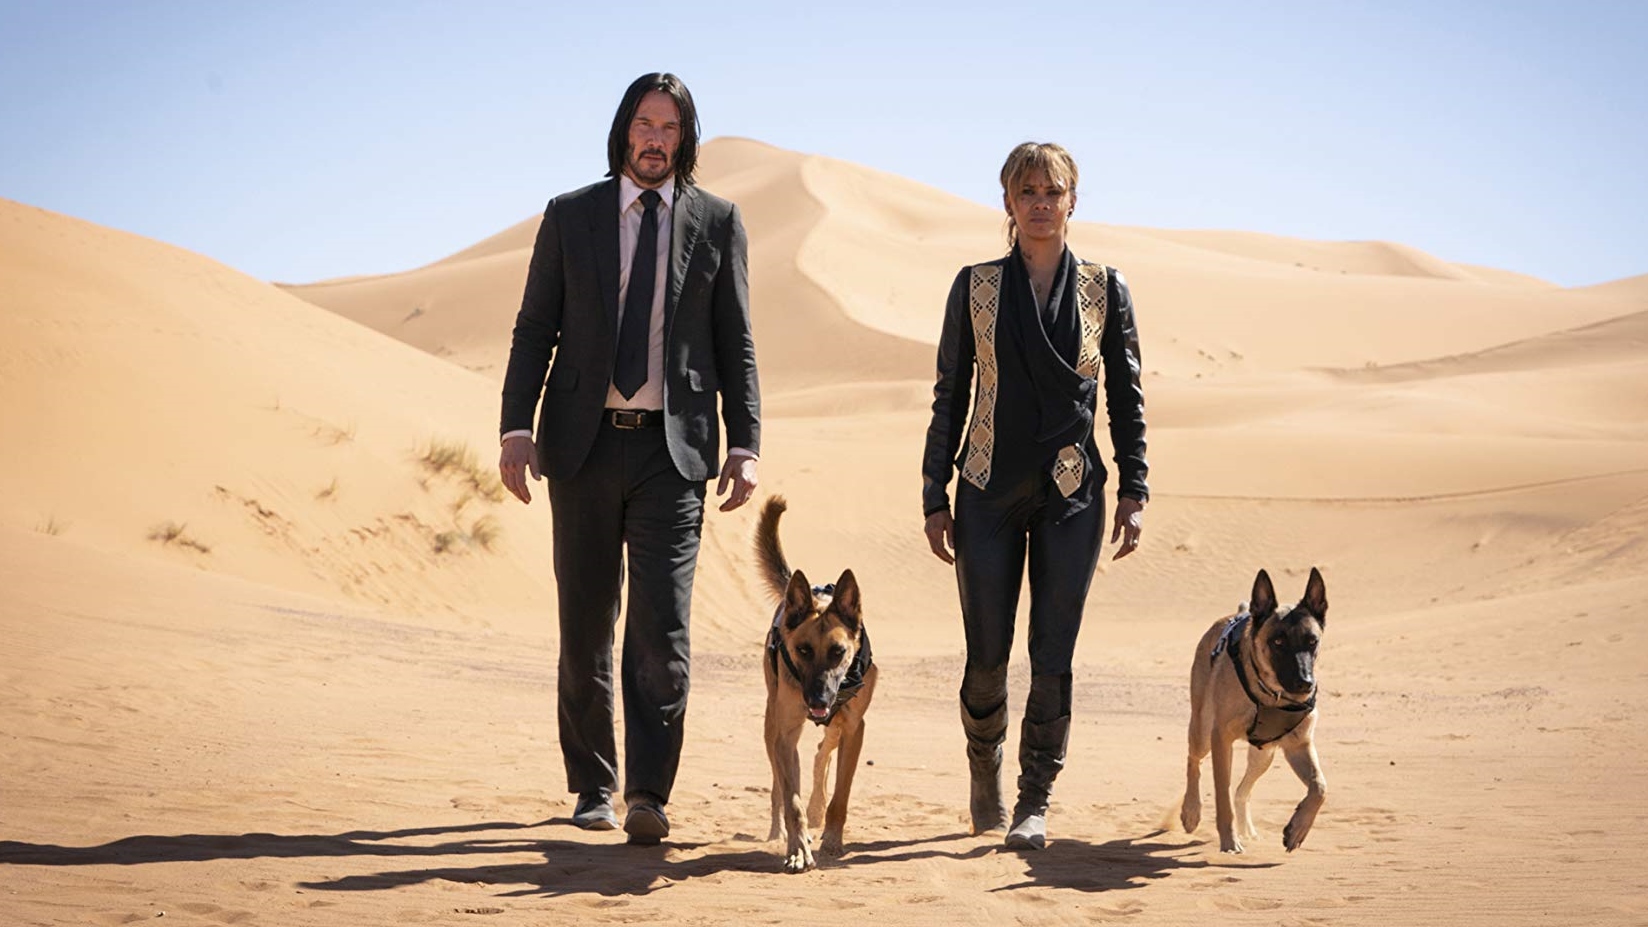 Action Scenes are the Highlight of JOHN WICK: CHAPTER 3 – PARABELLUM